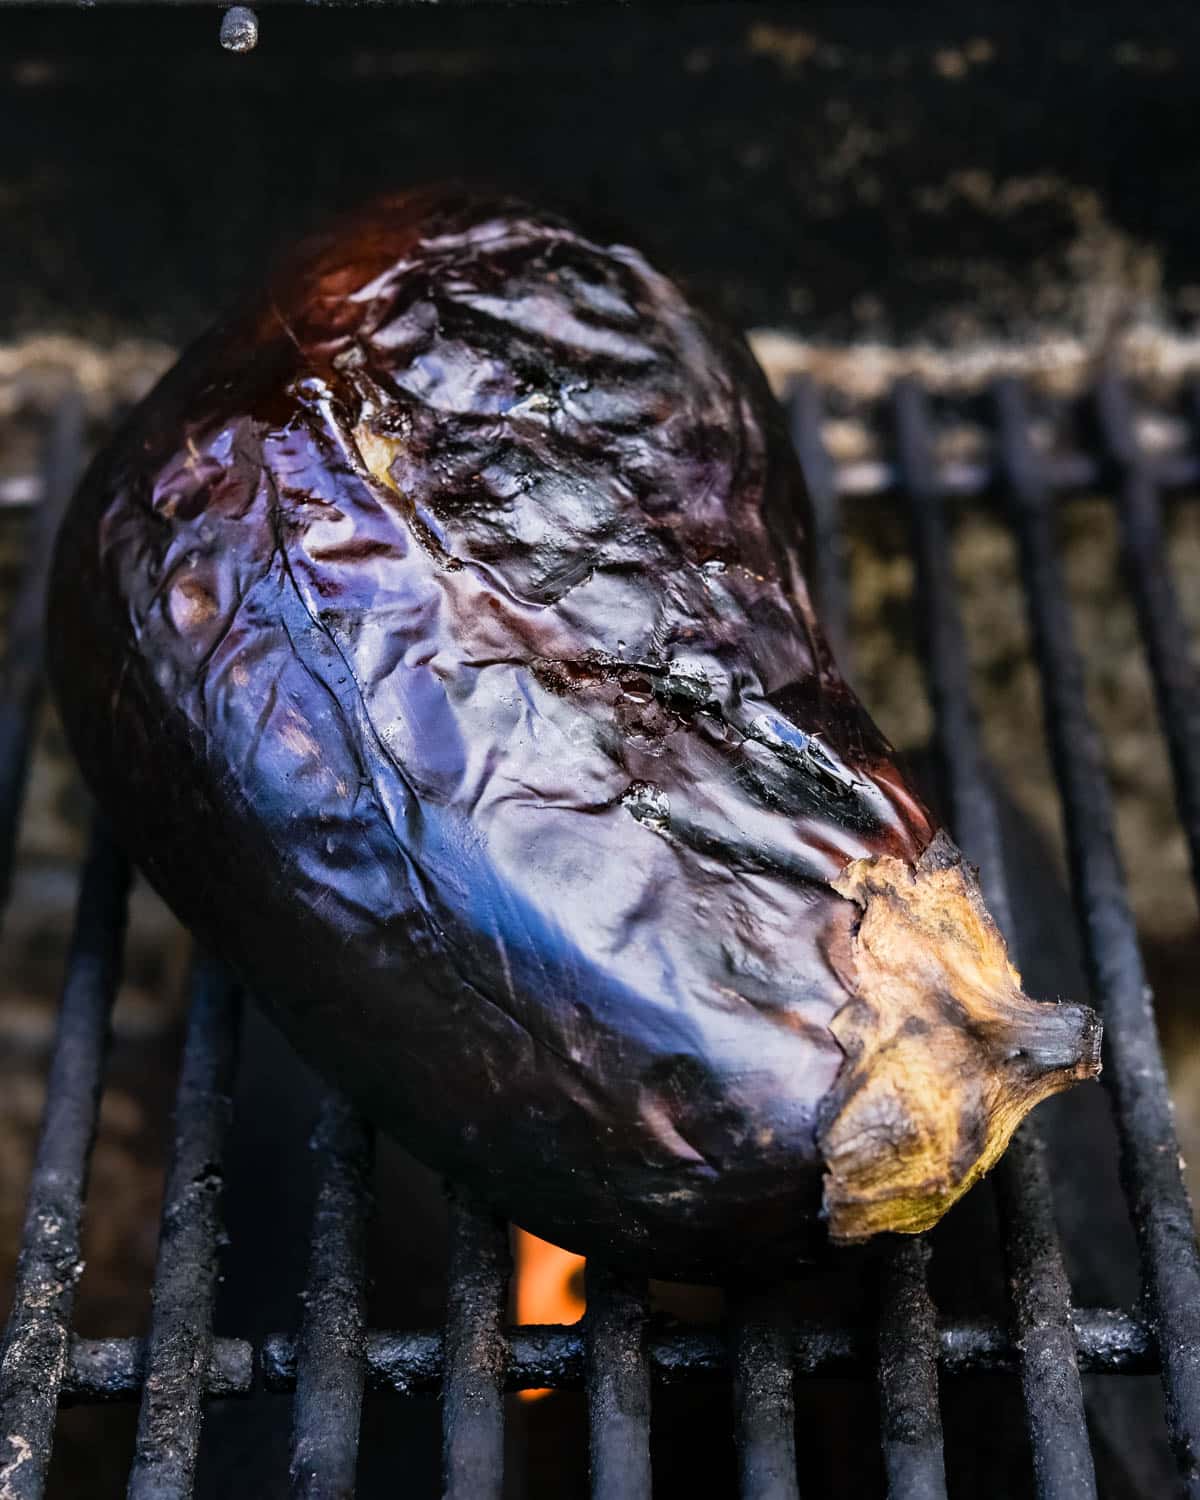 The wrinkled eggplant on the grill, shrinking as it cooks.